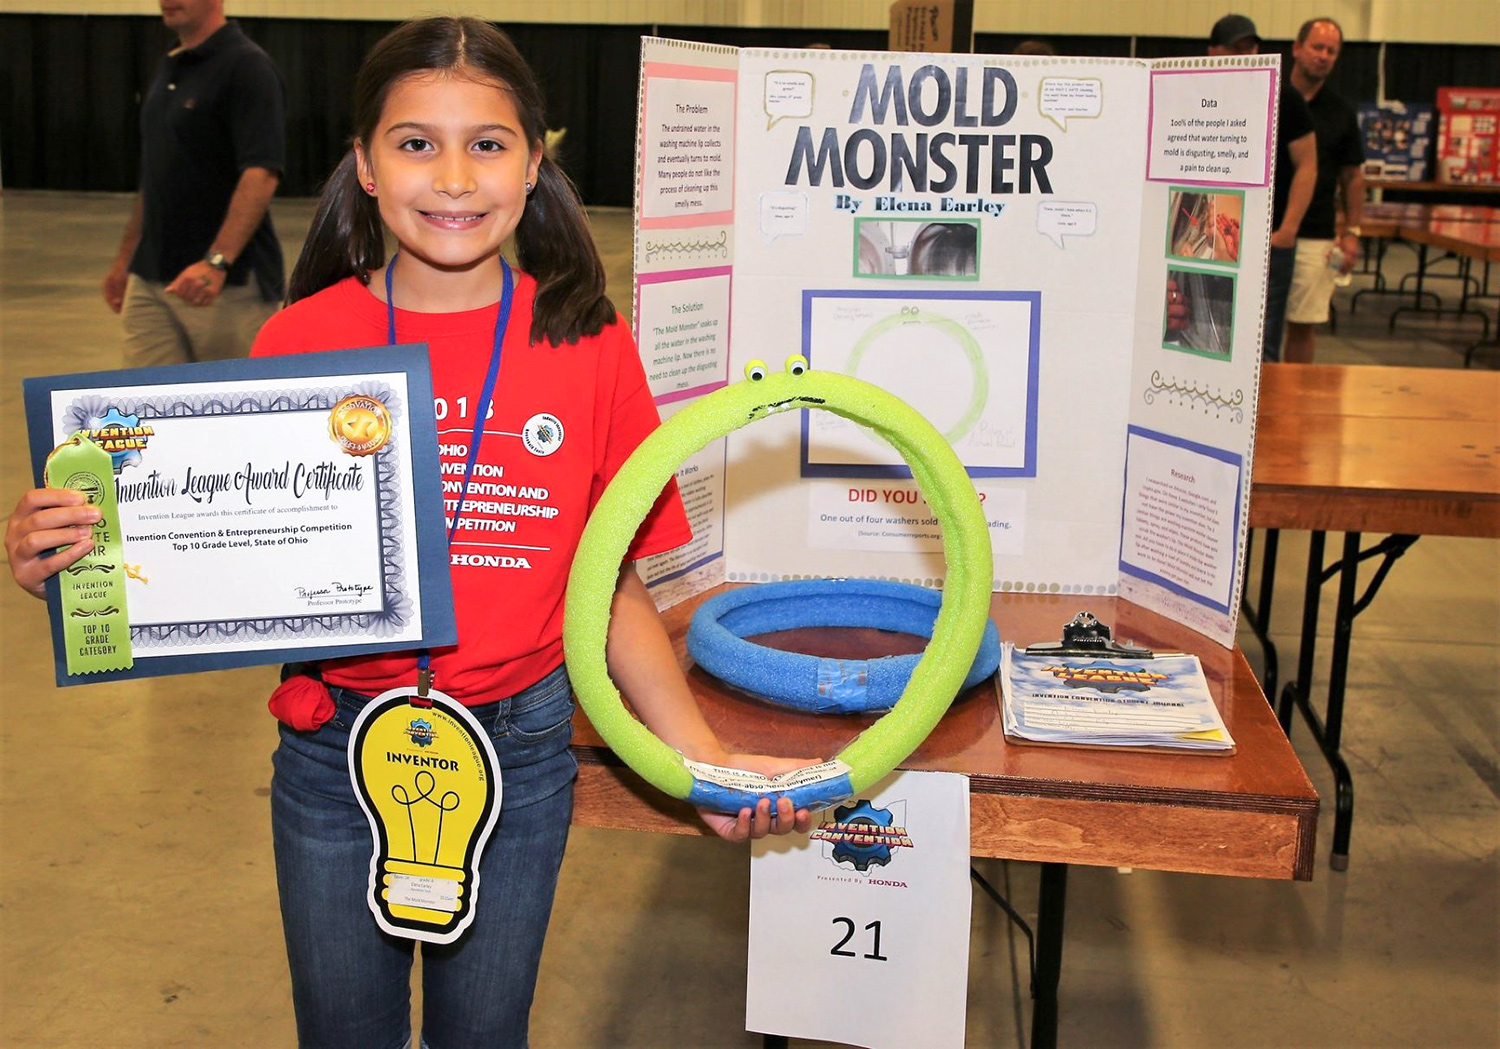 A young girl holds an award in one hand and a large green polymer ring in the other hand. She is standing in a gymnasium with a trifold informational poster board behind her with the words “mold monster” written in large black text. 